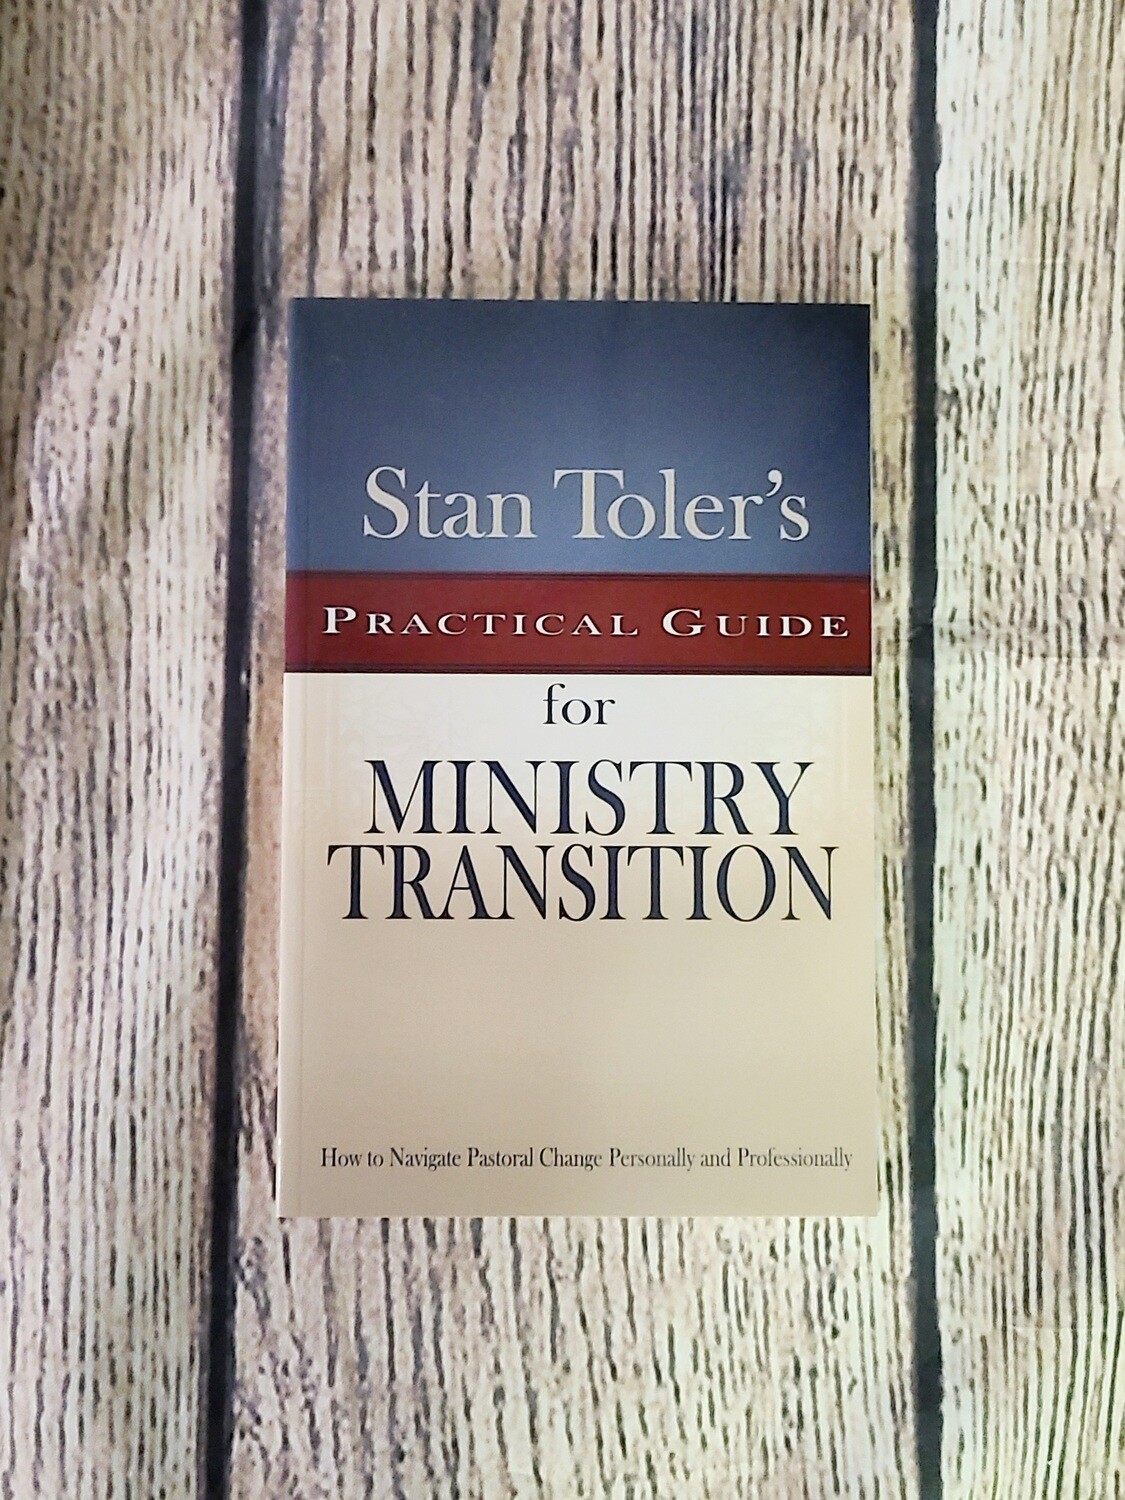 Stan Toler's Practical Guide for Ministry Transition by Stan Toler